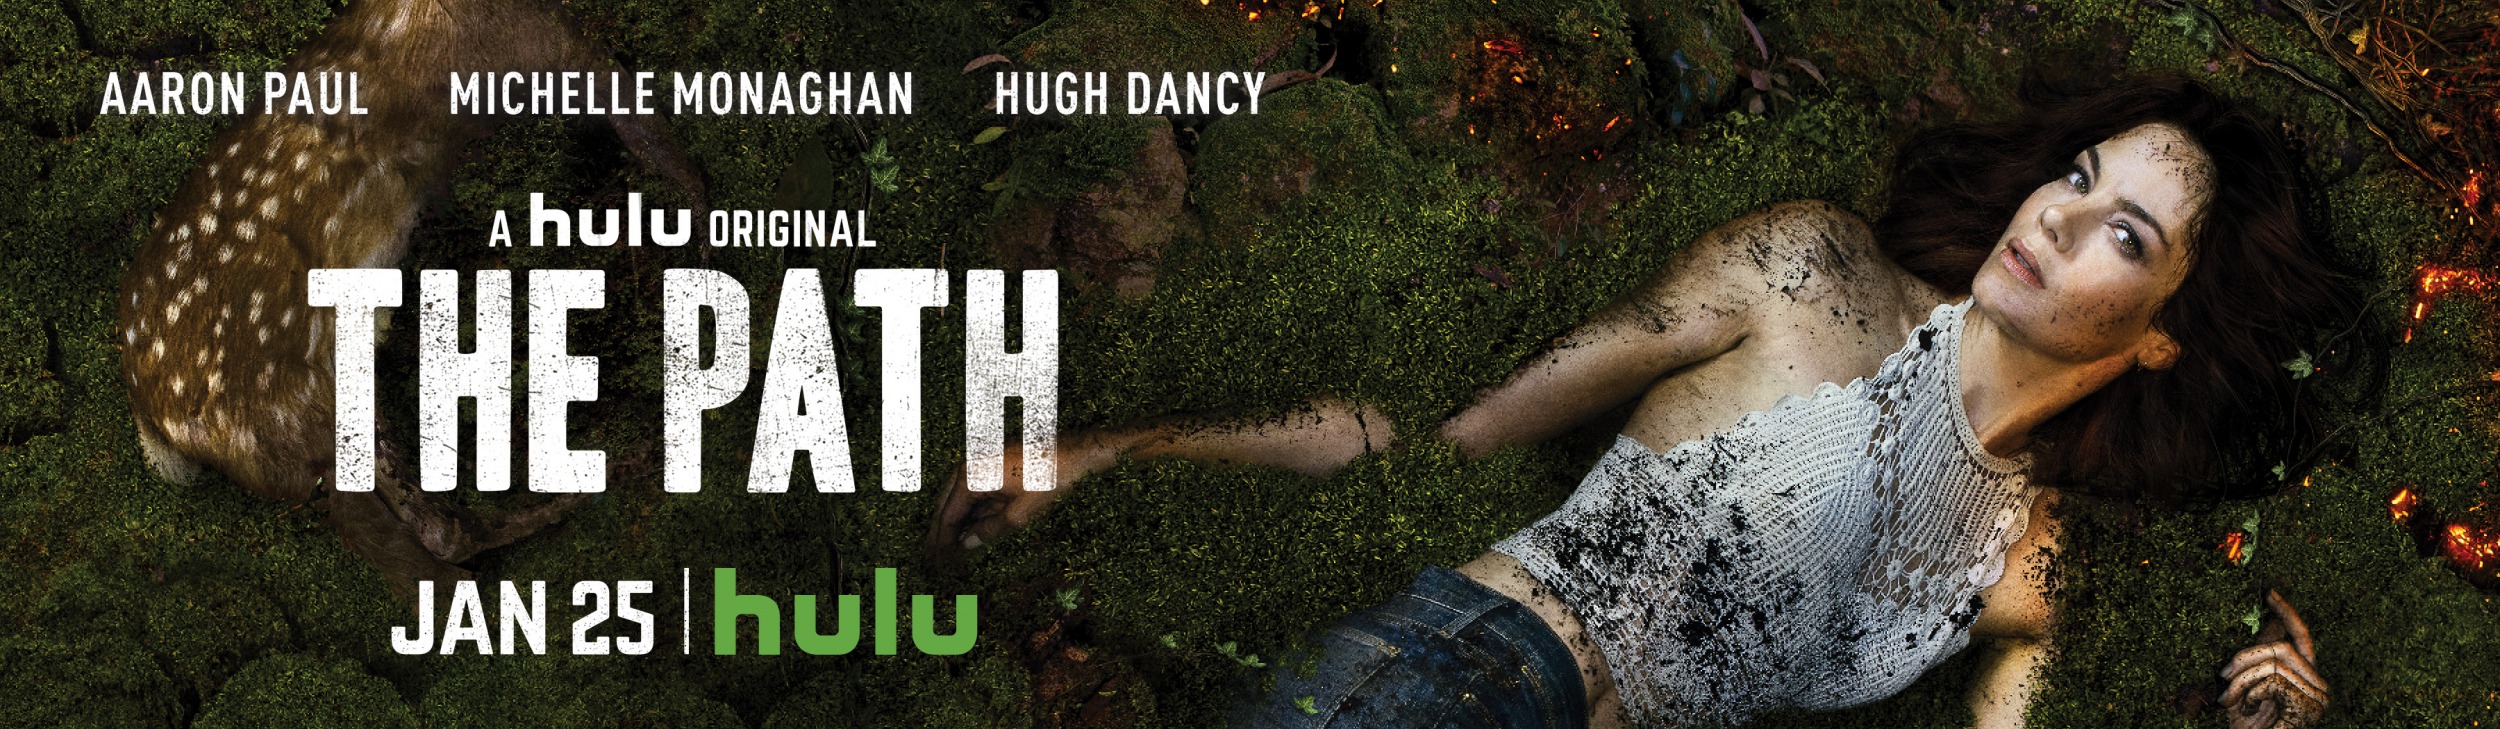 Mega Sized TV Poster Image for The Path (#7 of 12)